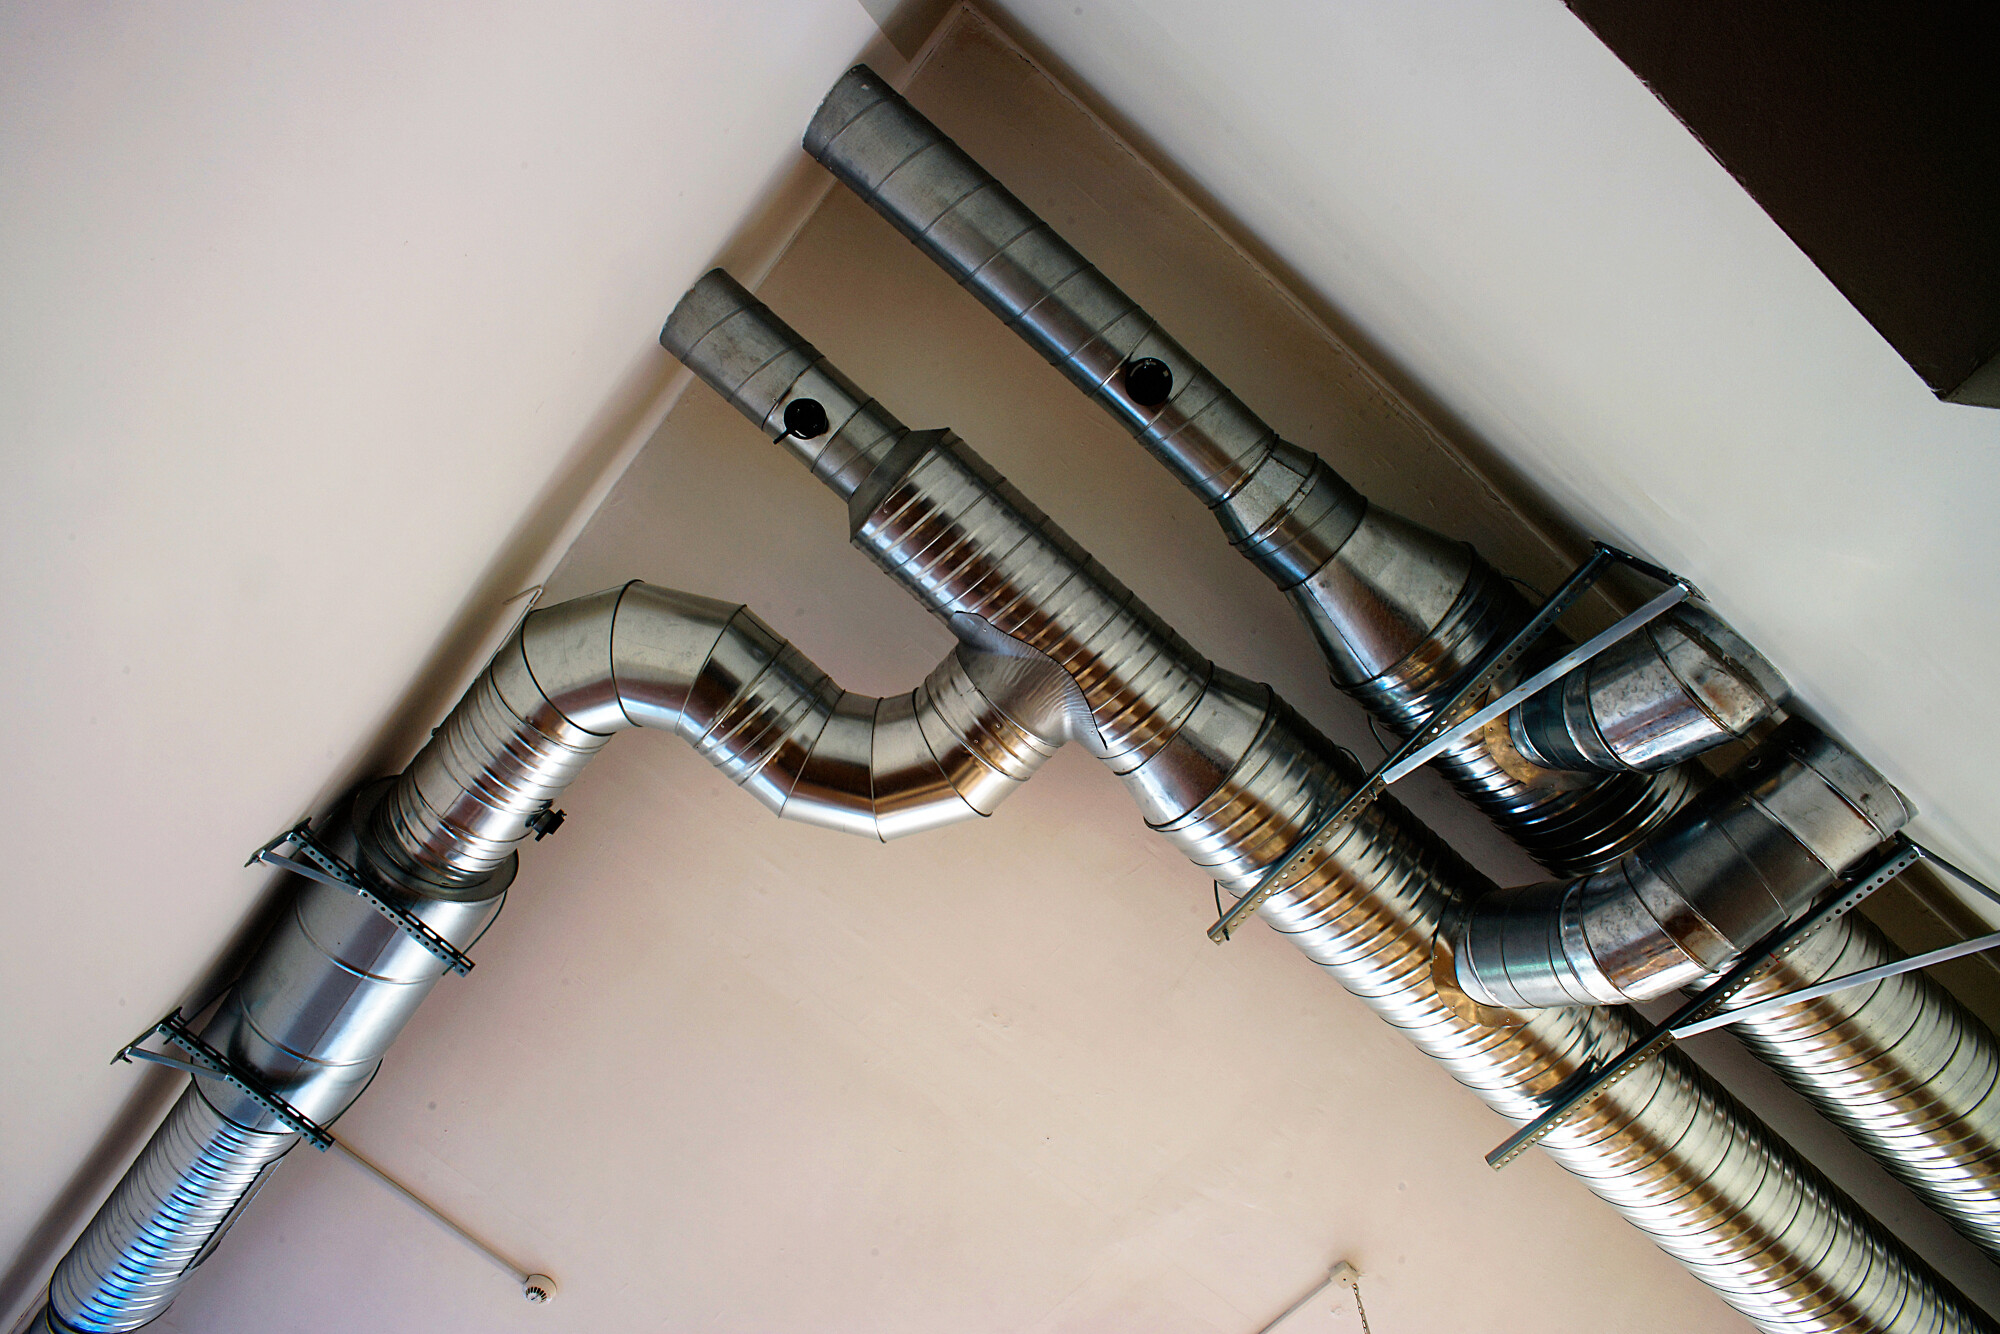 4 Reasons to Schedule Cypress, TX HVAC Maintenance in the Spring